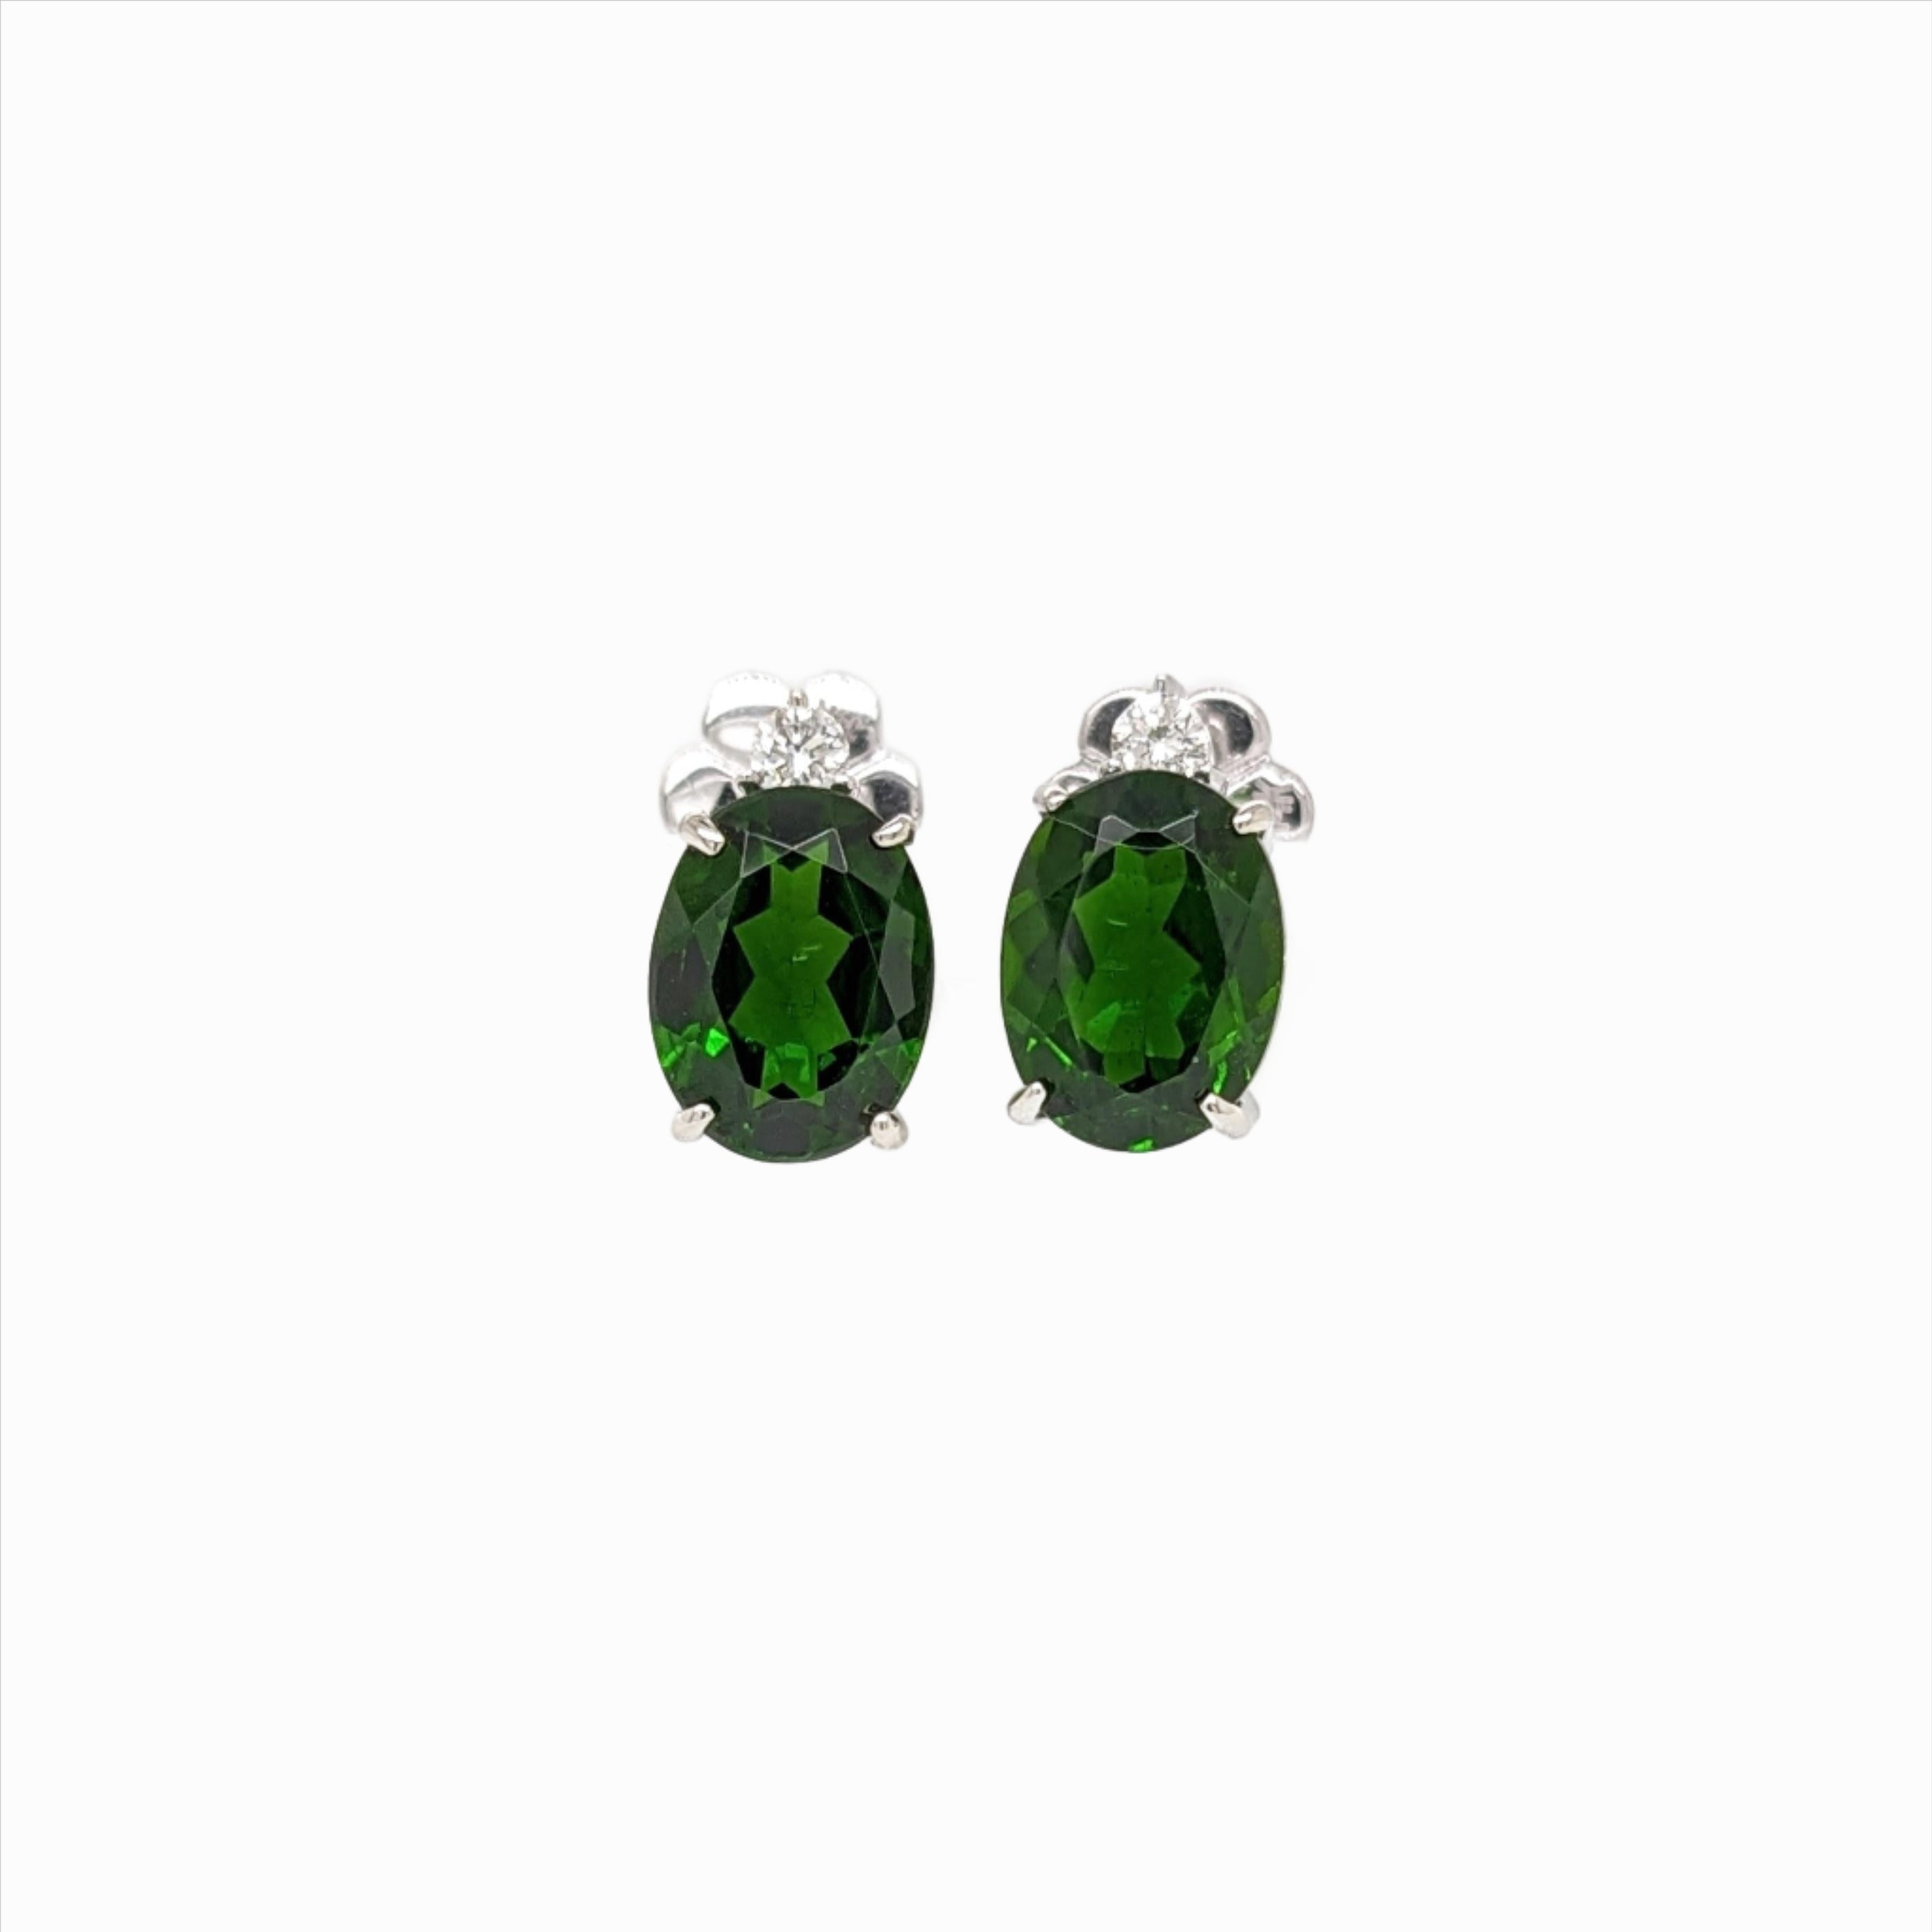 2.6ct Chrome Diopside Earrings w Natural Diamonds in Solid 14K Gold Oval 7x5mm